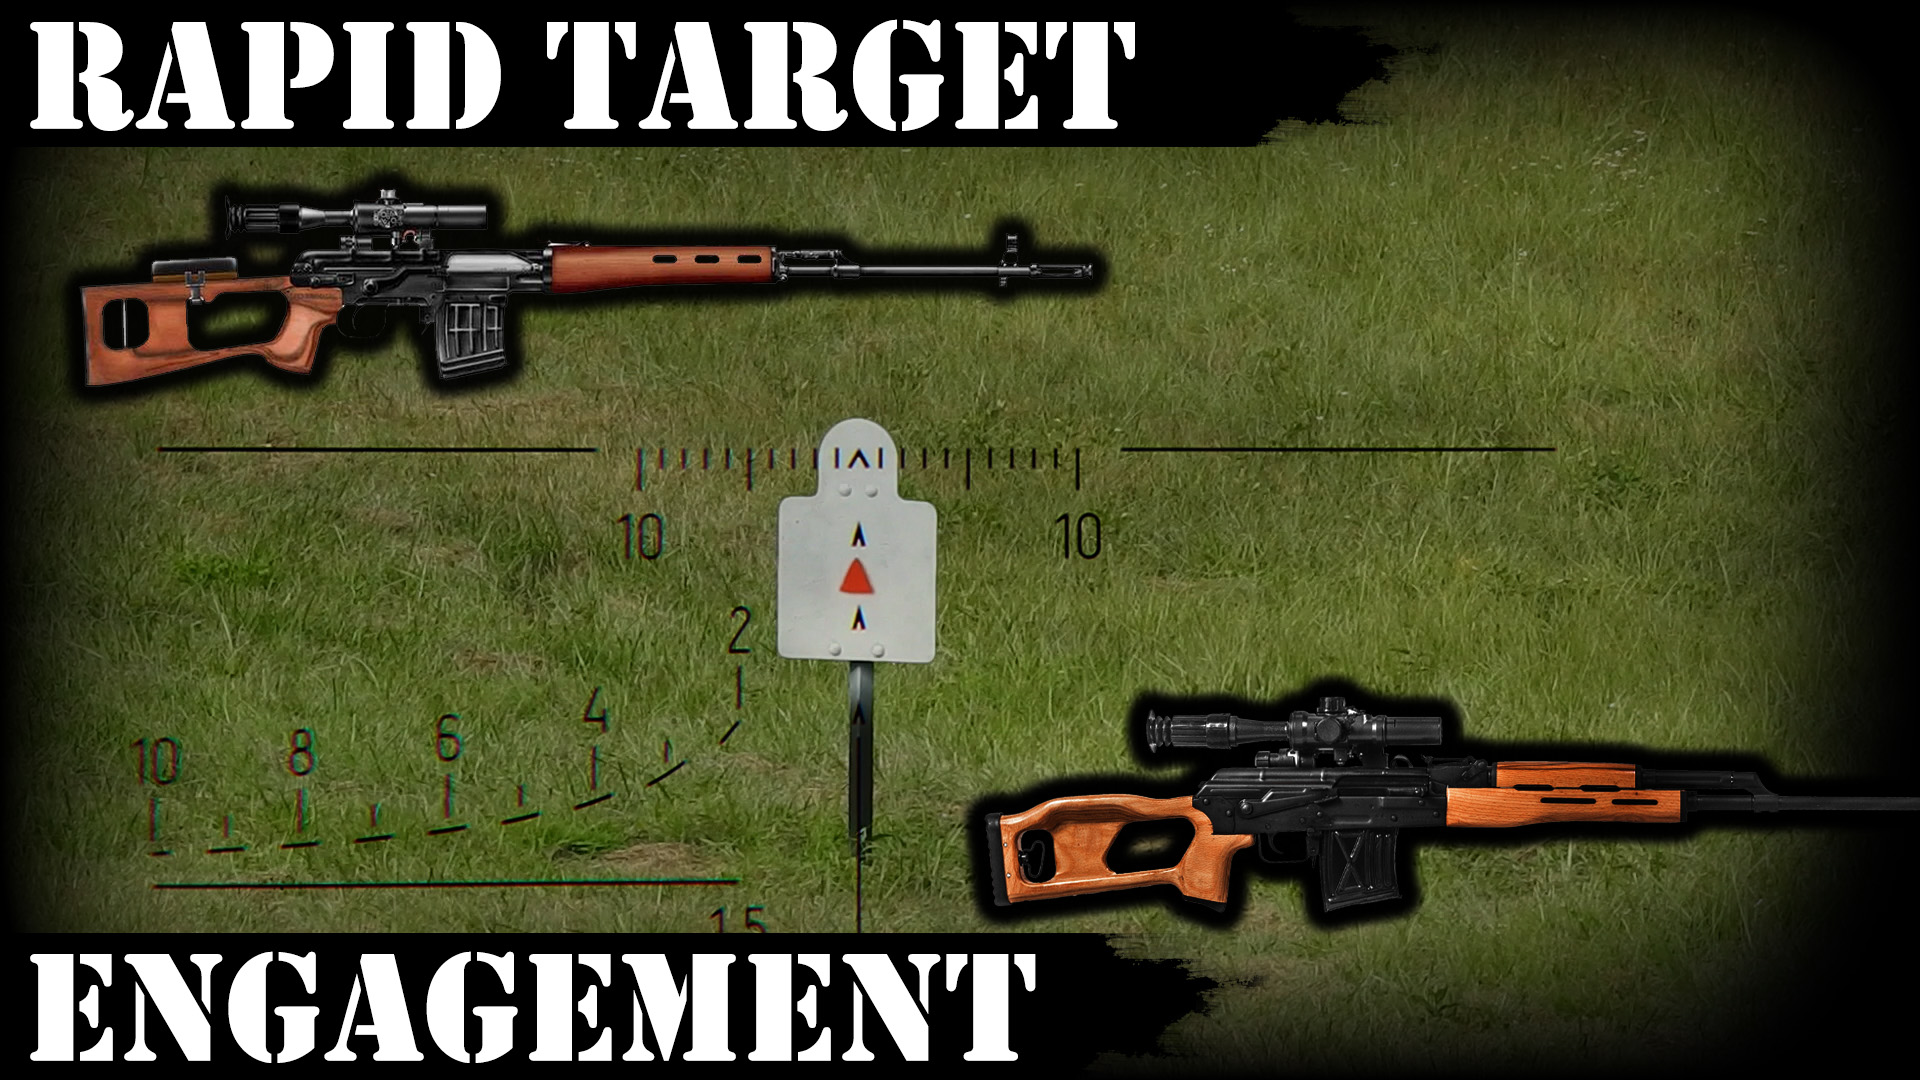 Rapid Target Engagement with PSL 54 or SVD Type rifles